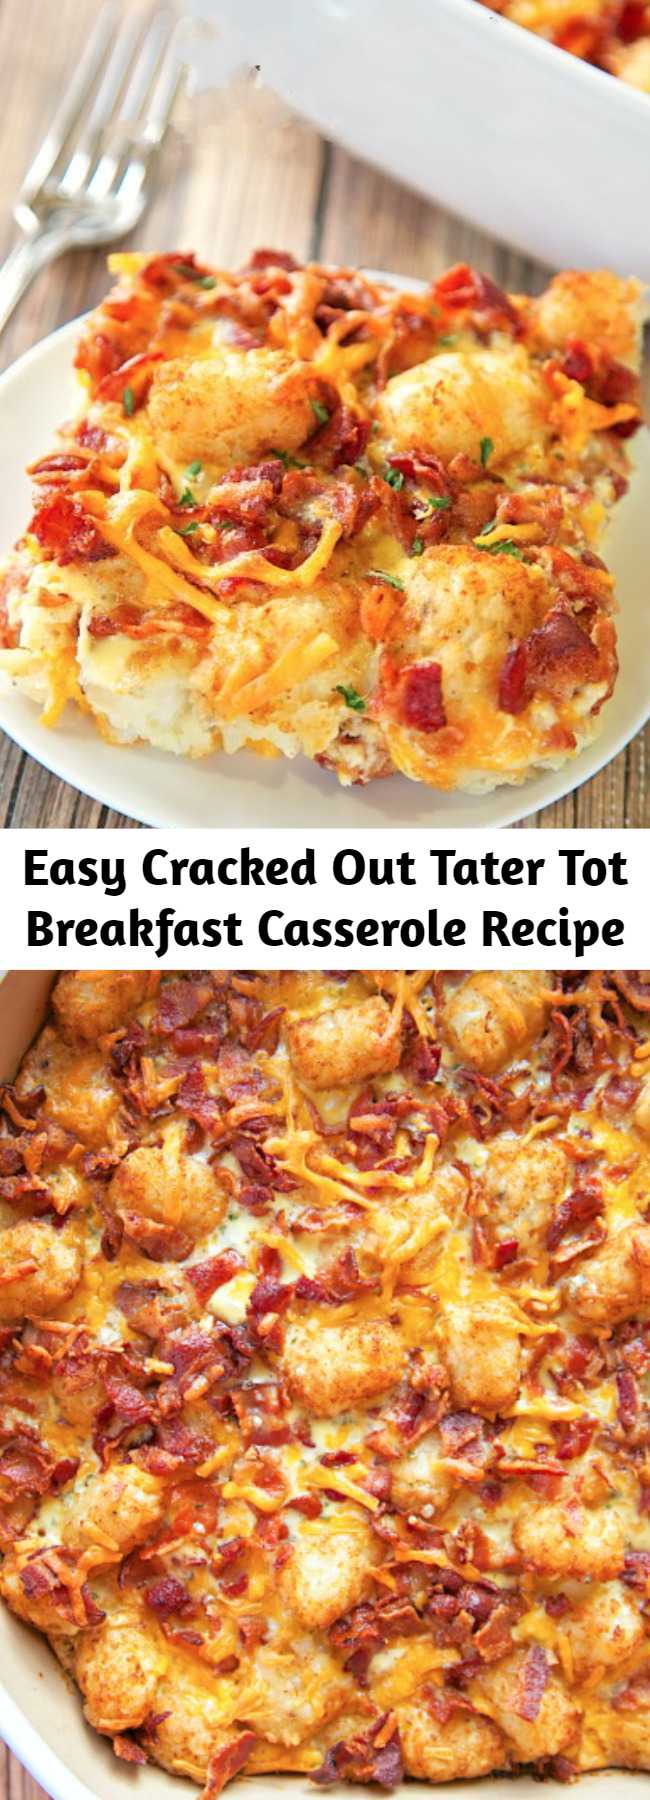 Easy Cracked Out Tater Tot Breakfast Casserole Recipe - Great make-ahead recipe! Only 6 ingredients!! Bacon, cheddar cheese, tater tots, eggs, milk, Ranch mix. Can refrigerate or freeze for later. Great for breakfast. lunch or dinner. Everyone loves this easy breakfast casserole!! #breakfast #casserole #tatertots #bacon #freezermeal